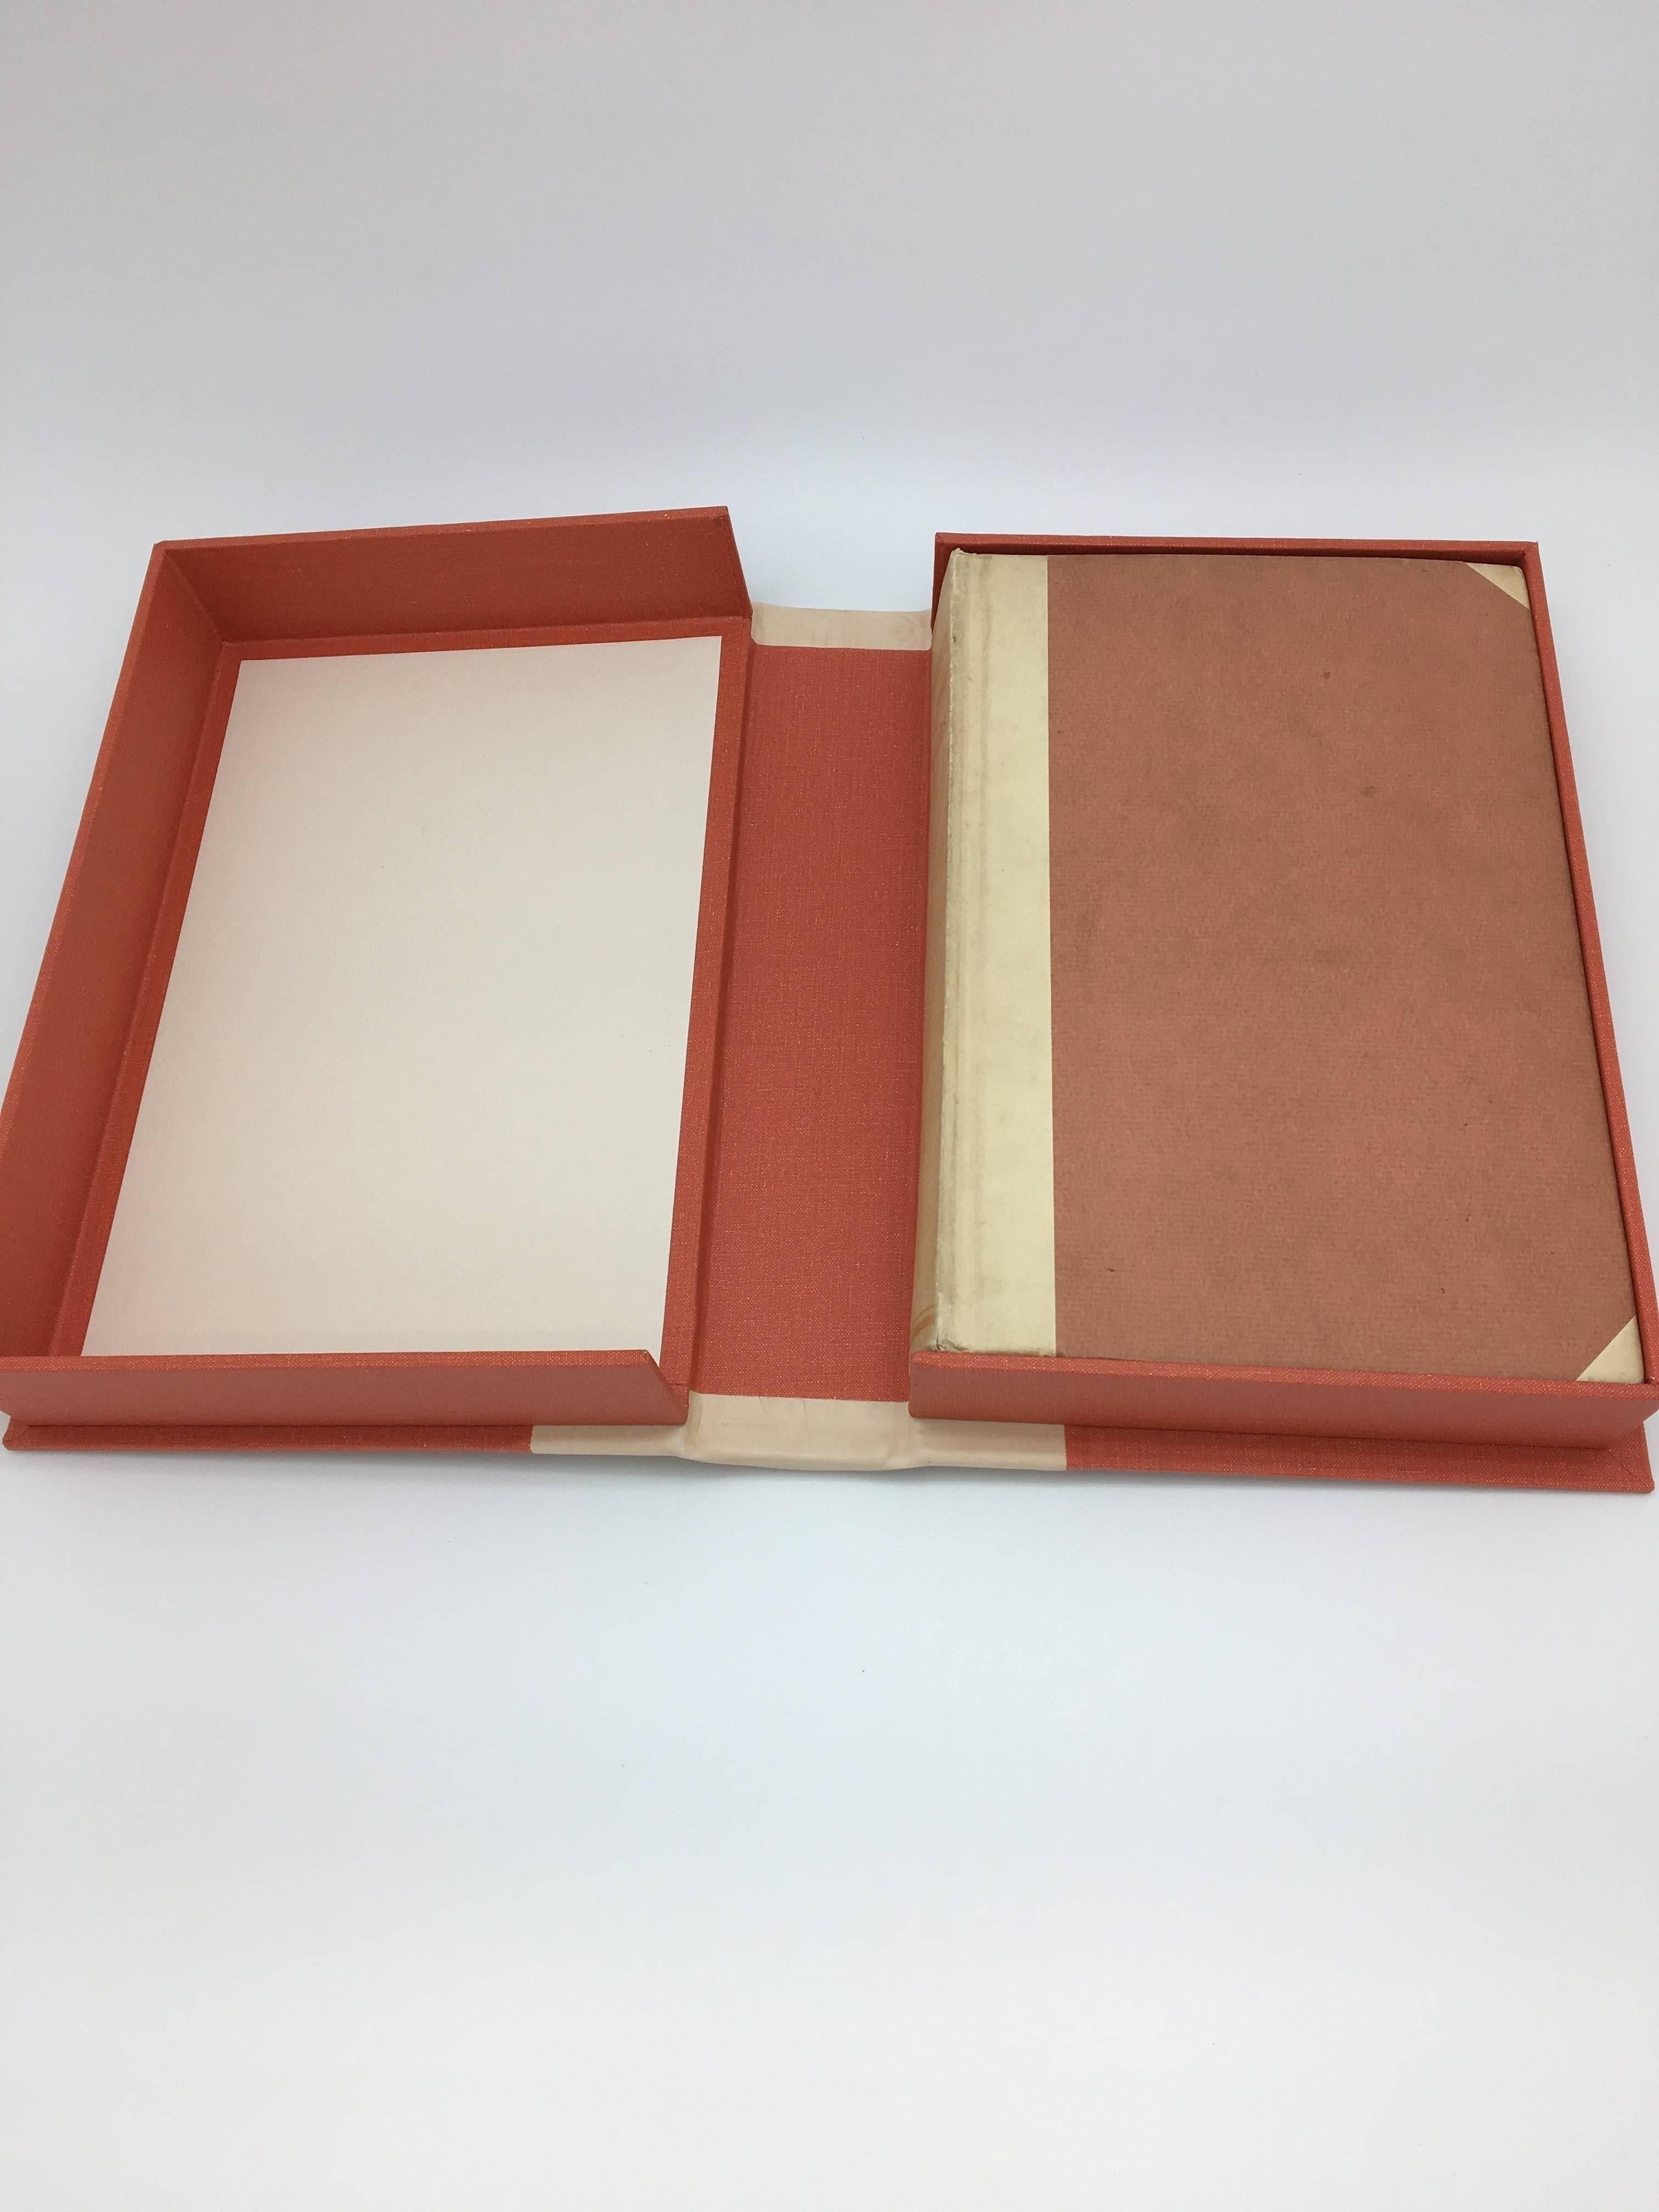 Miller, Francis Trevelyan (Charles A Lindbergh). Lindbergh: His Story in Pictures. New York and London: G.P. Putnam's Sons (Knickerbocker Press), 1929. Collector's Edition. Octavo, original three-quarter vellum, pictorial endpapers. Housed in a